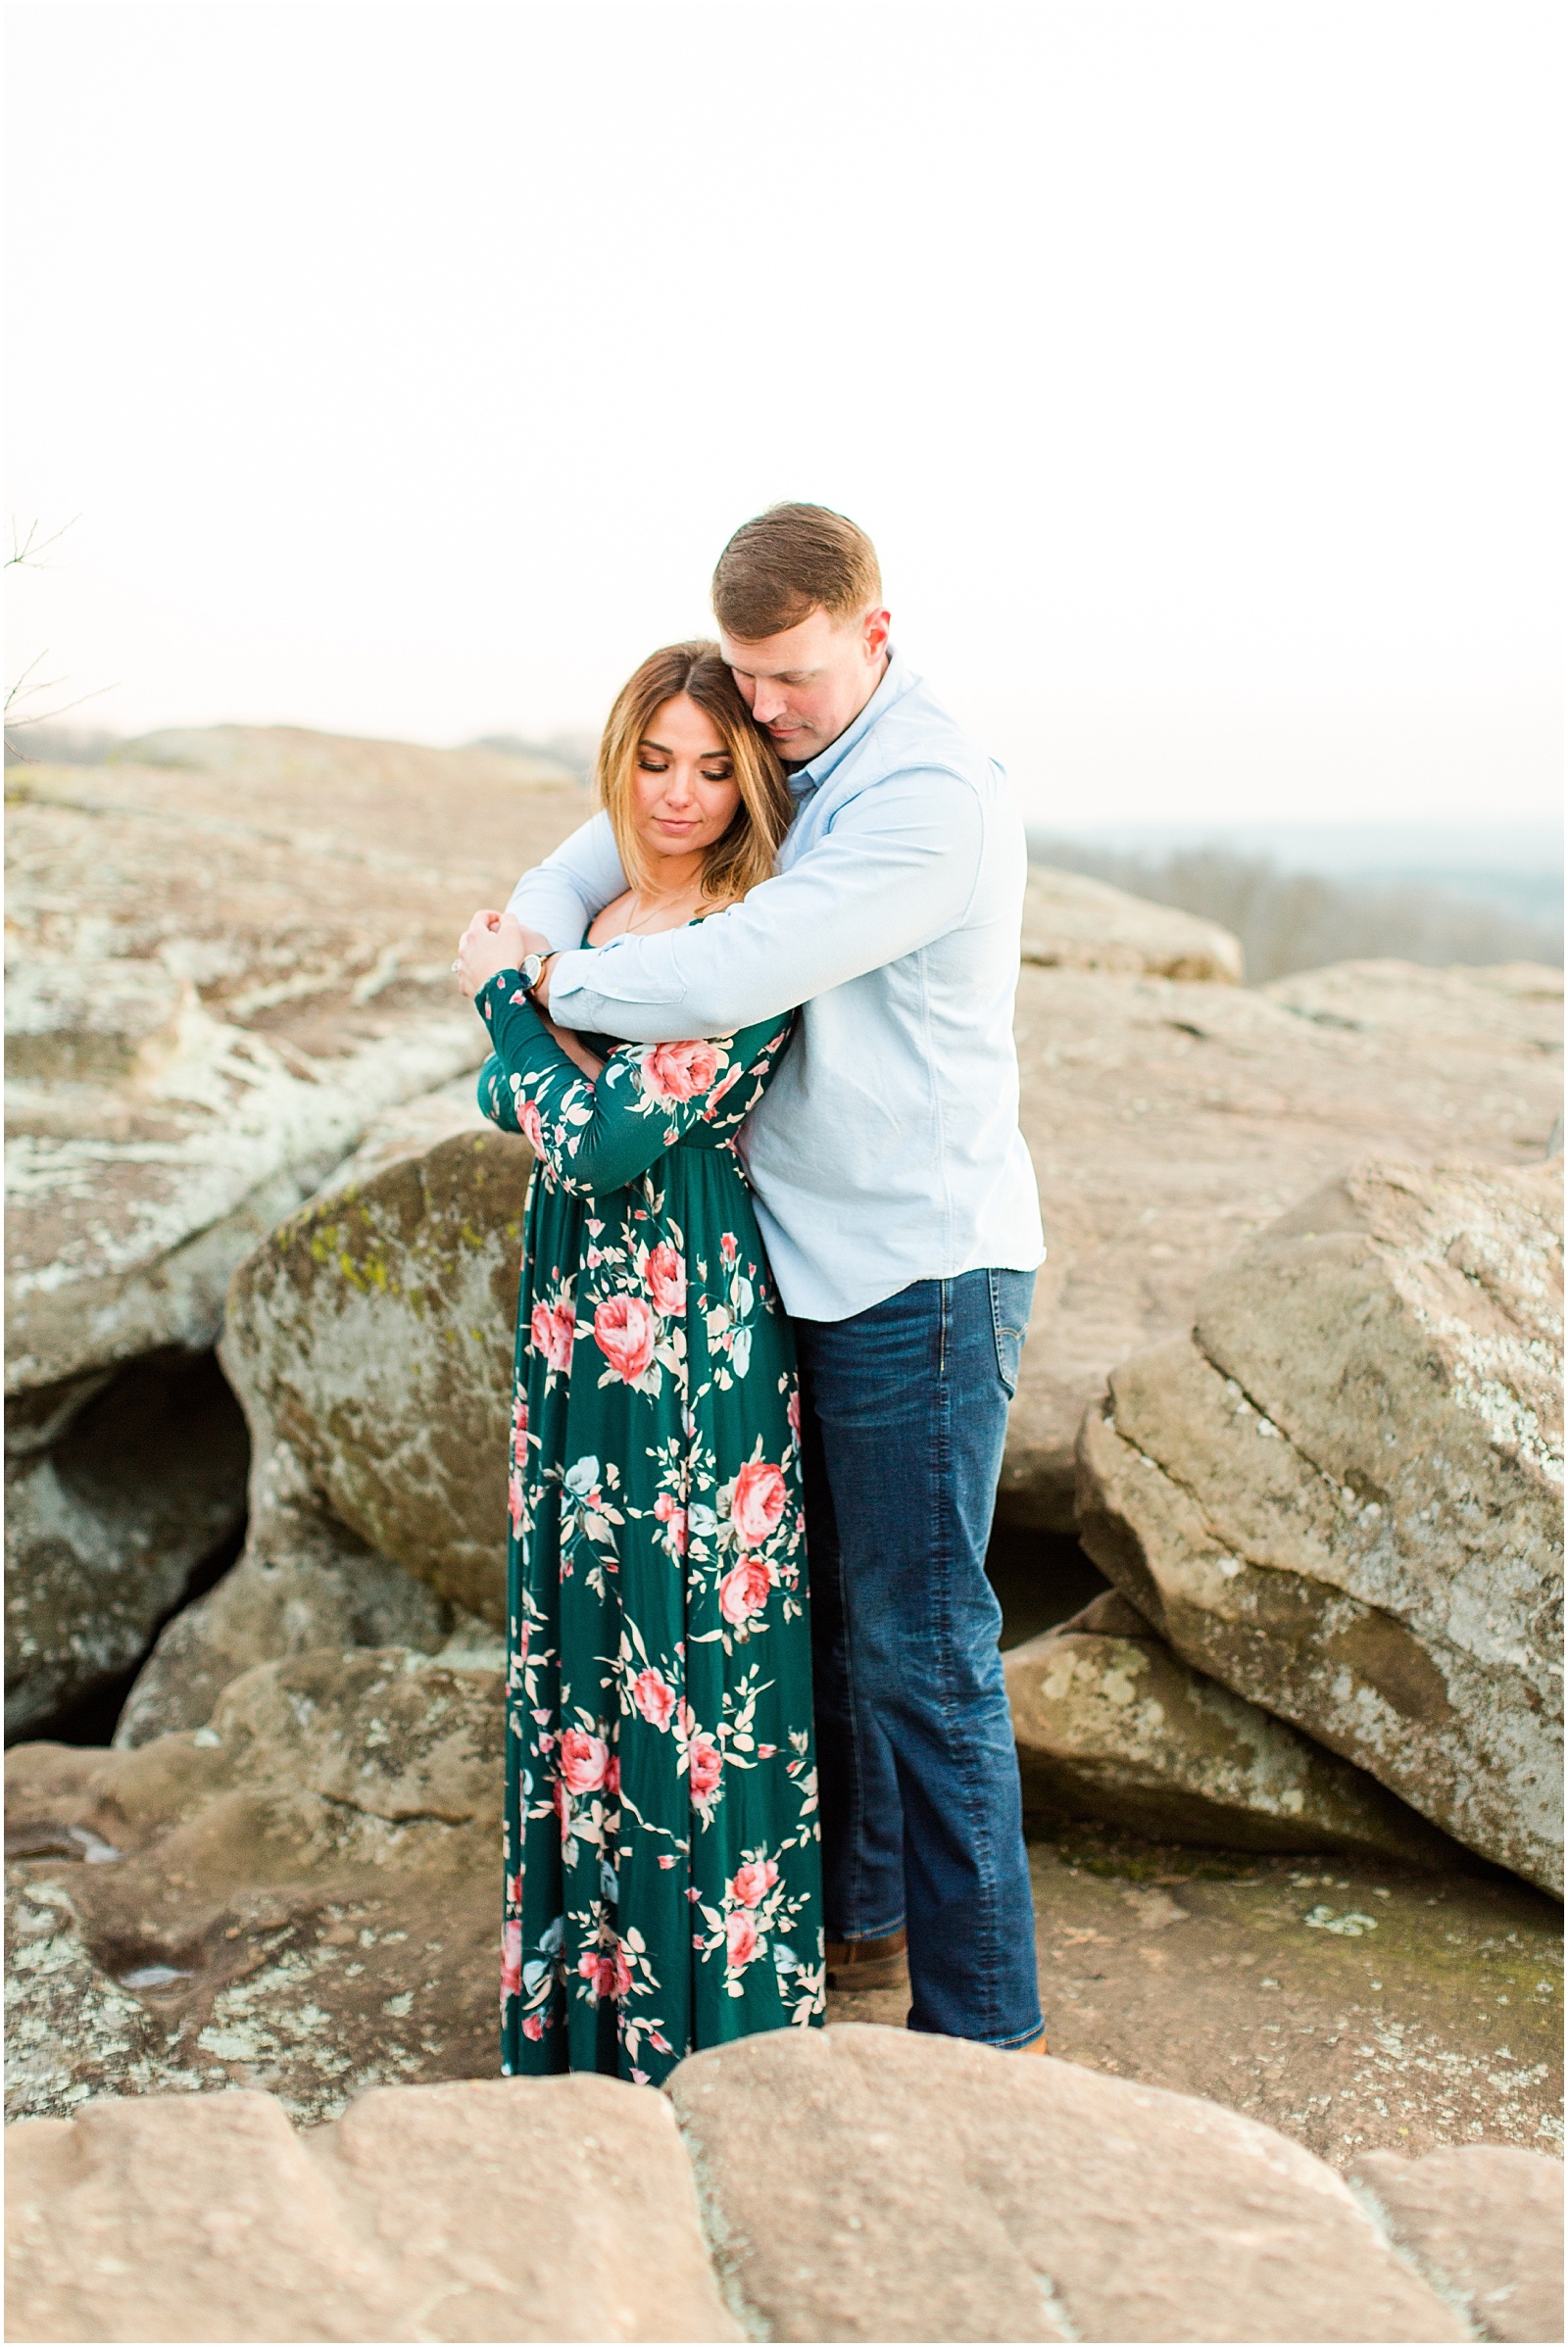 A Sunny Garden of the Gods Engagement Session | Shiloh and Lee | Bret and Brandie Photography091.jpg